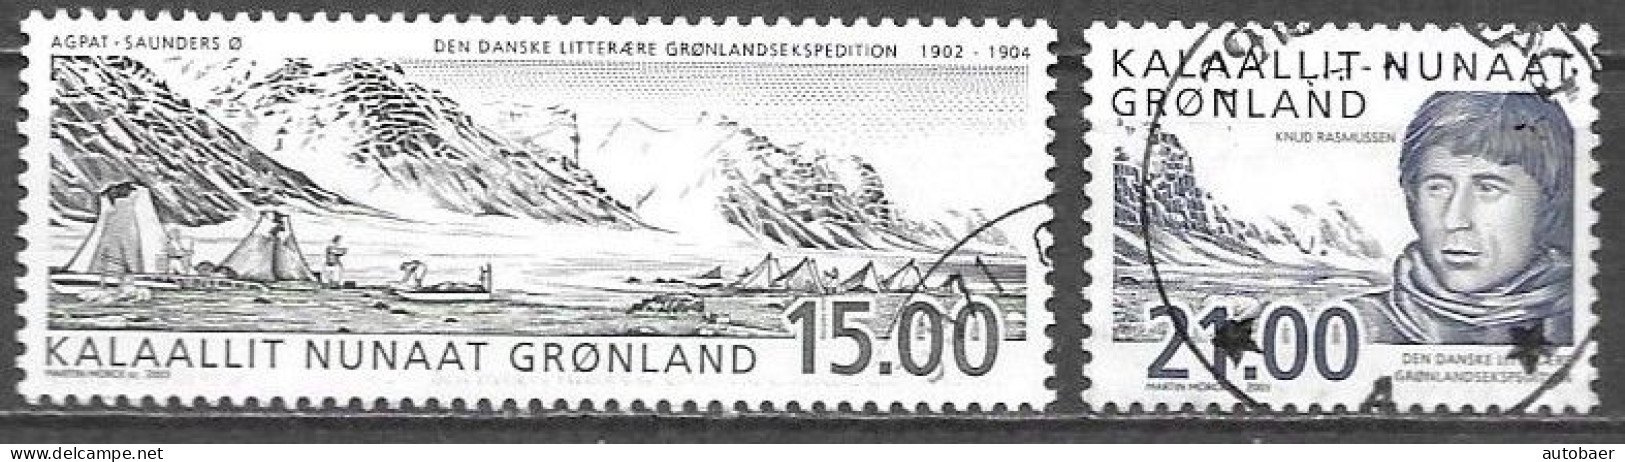 Grönland Greenland Gronland 2003 Expeditions Saunders Island Rasmussen Michel 396-97 Used Obliteré Gest. Oo Cancelled - Used Stamps